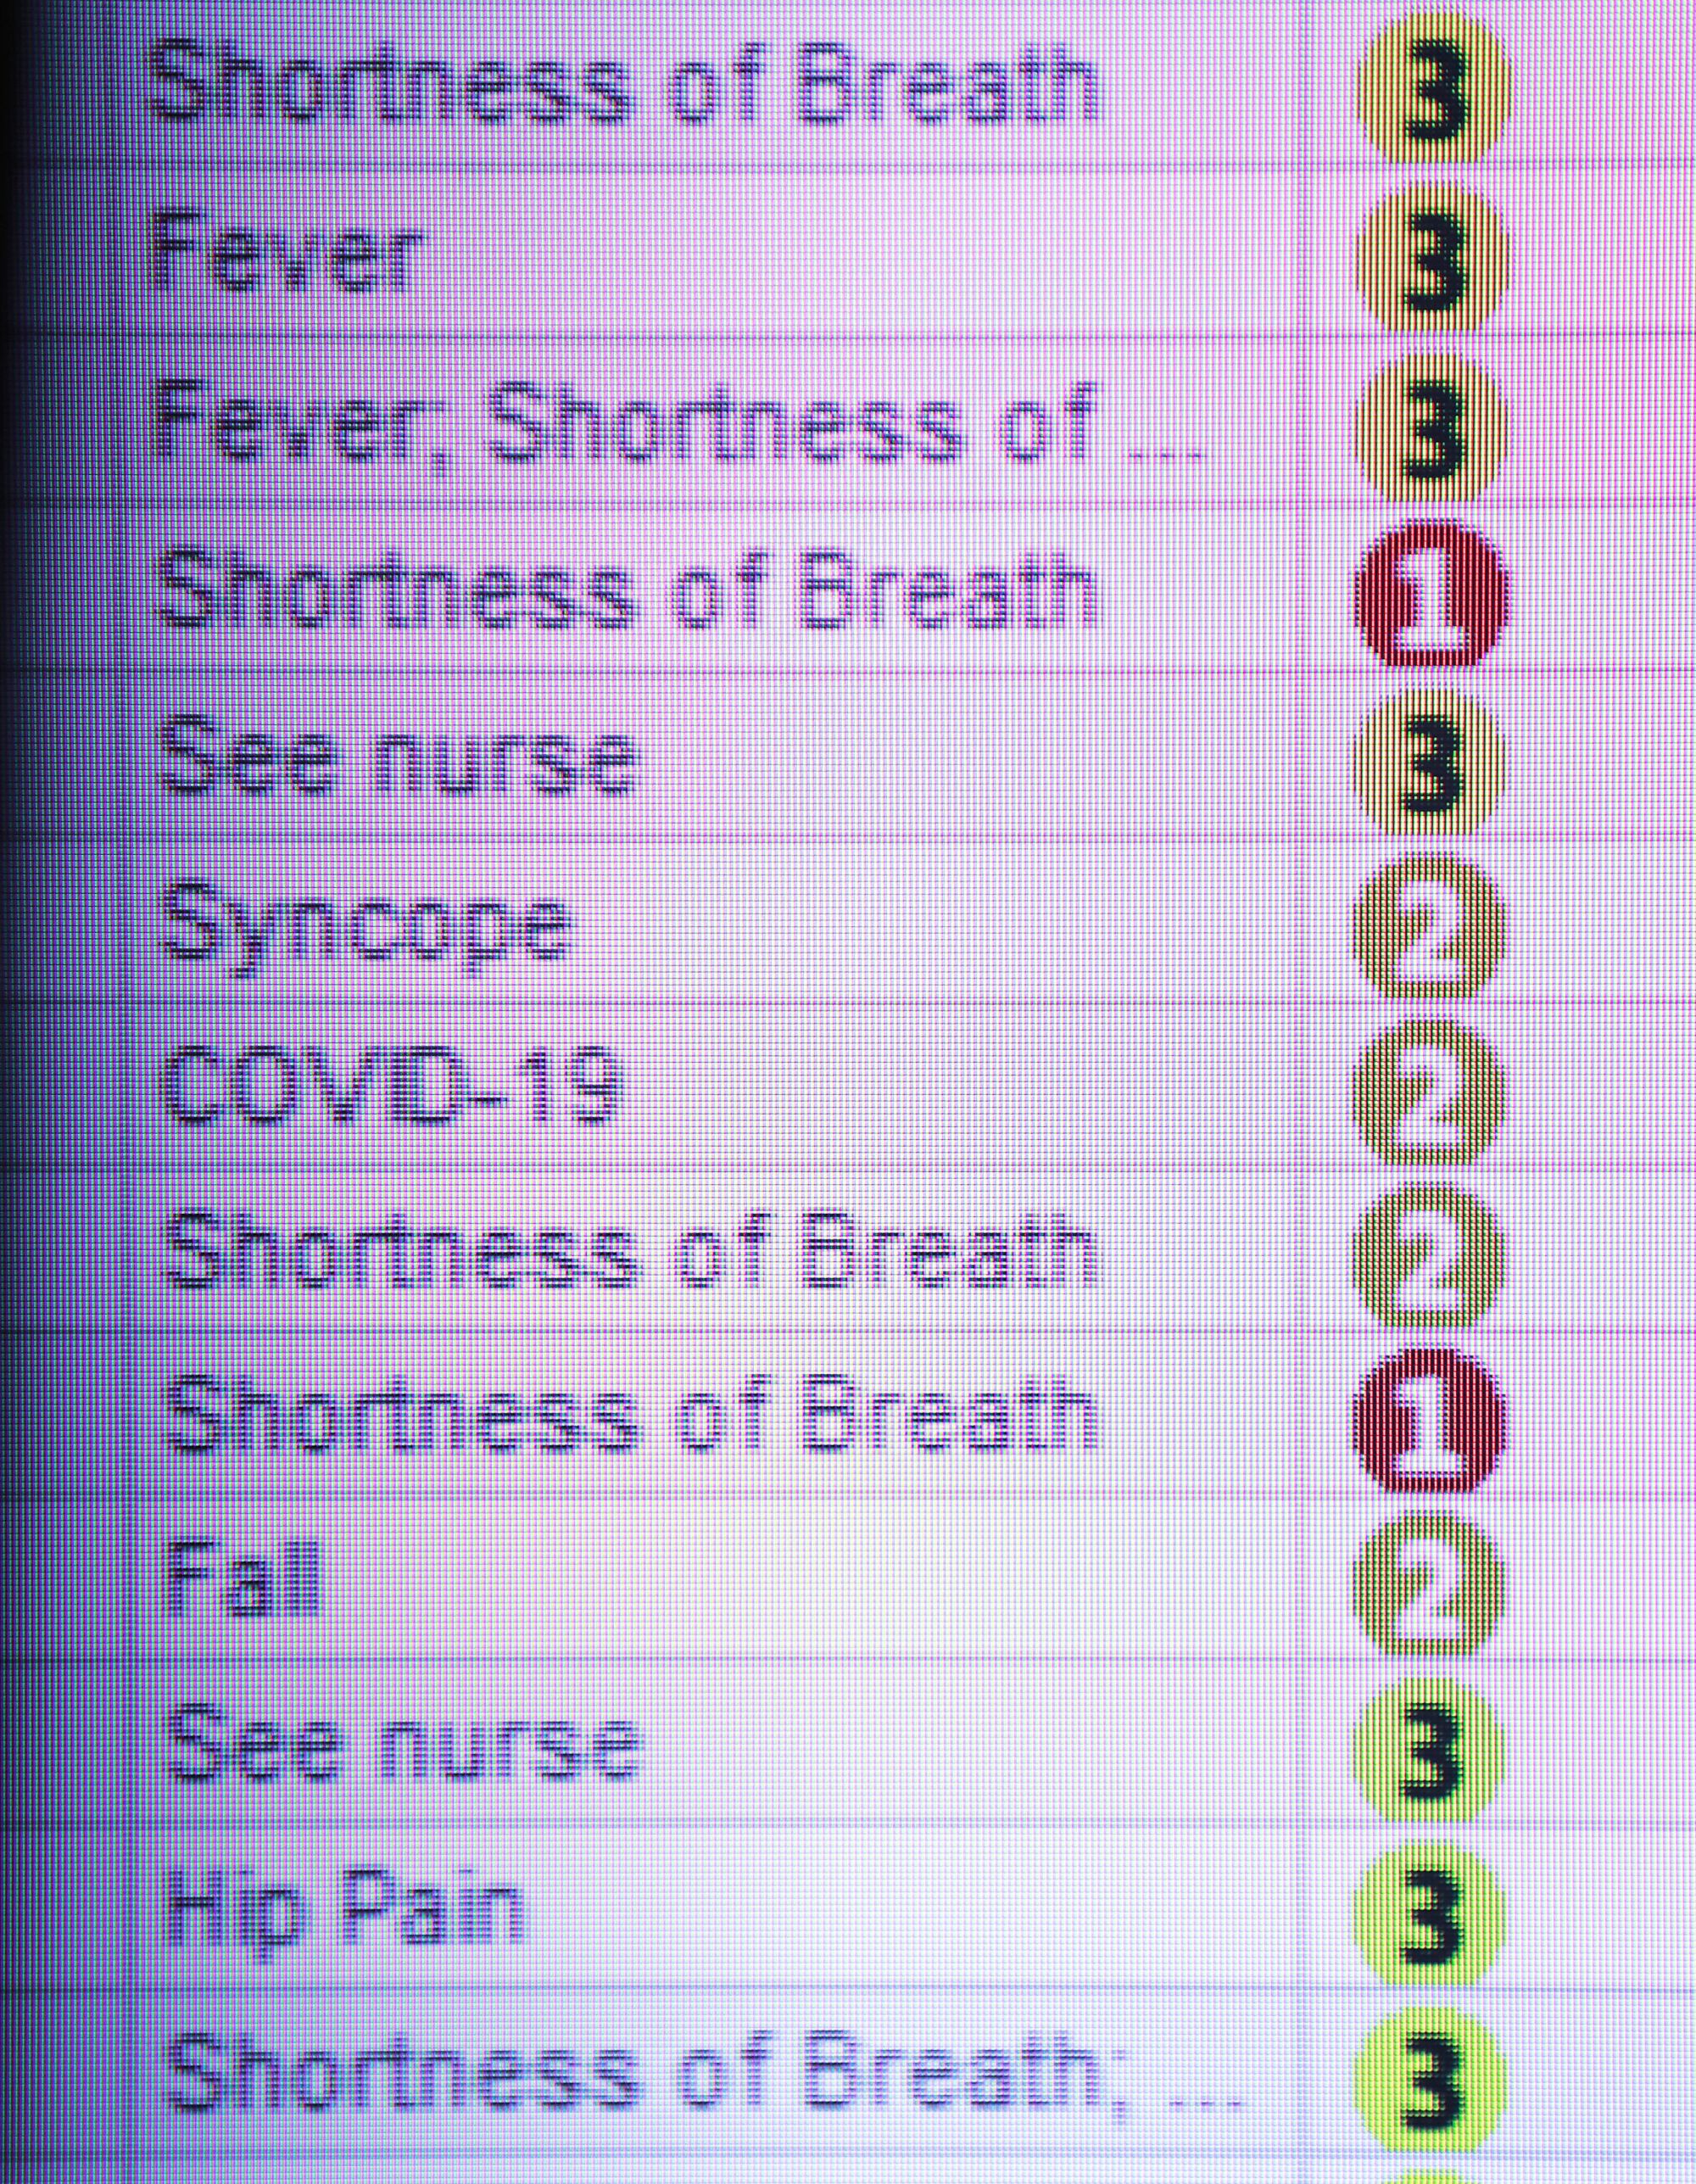 A monitor shows the symptoms of patients in the emergency room at Scripps Memorial Hospital La Jolla on Monday.